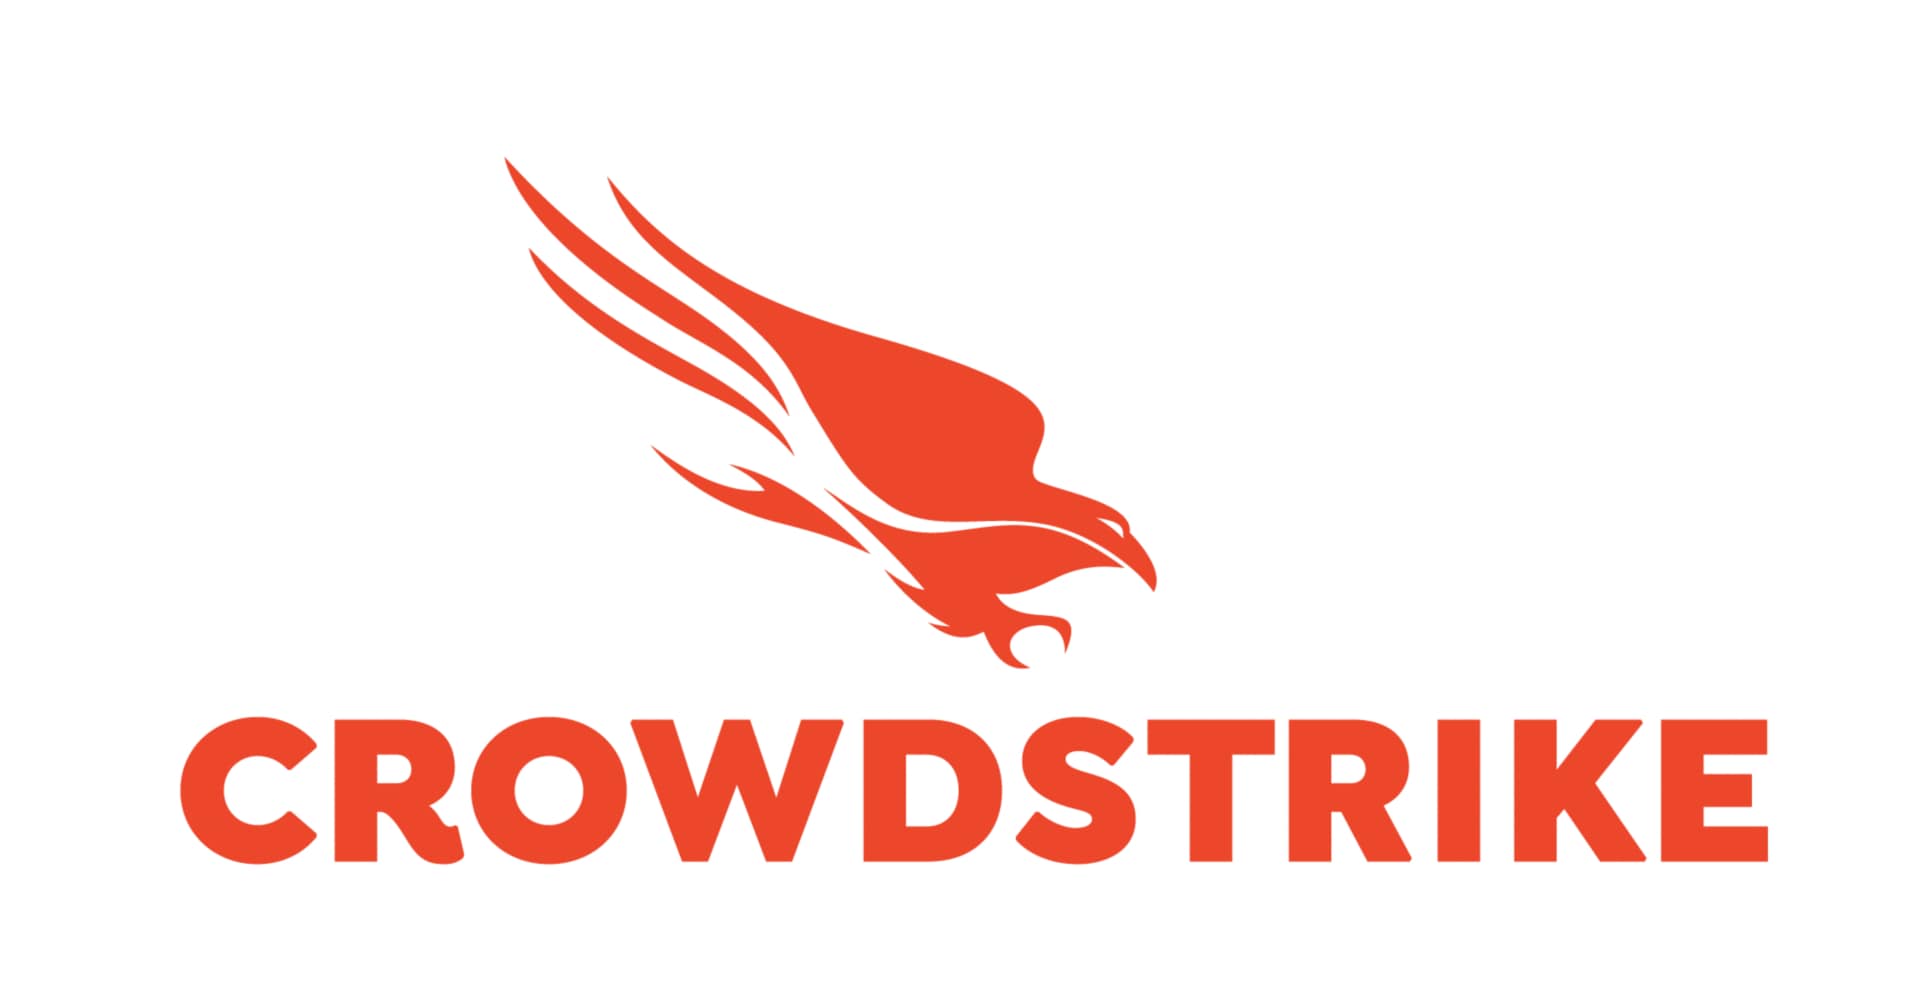 CrowdStrike 12-Month Insight for Mobile (Requires Falcon for Mobile) Software Subscription